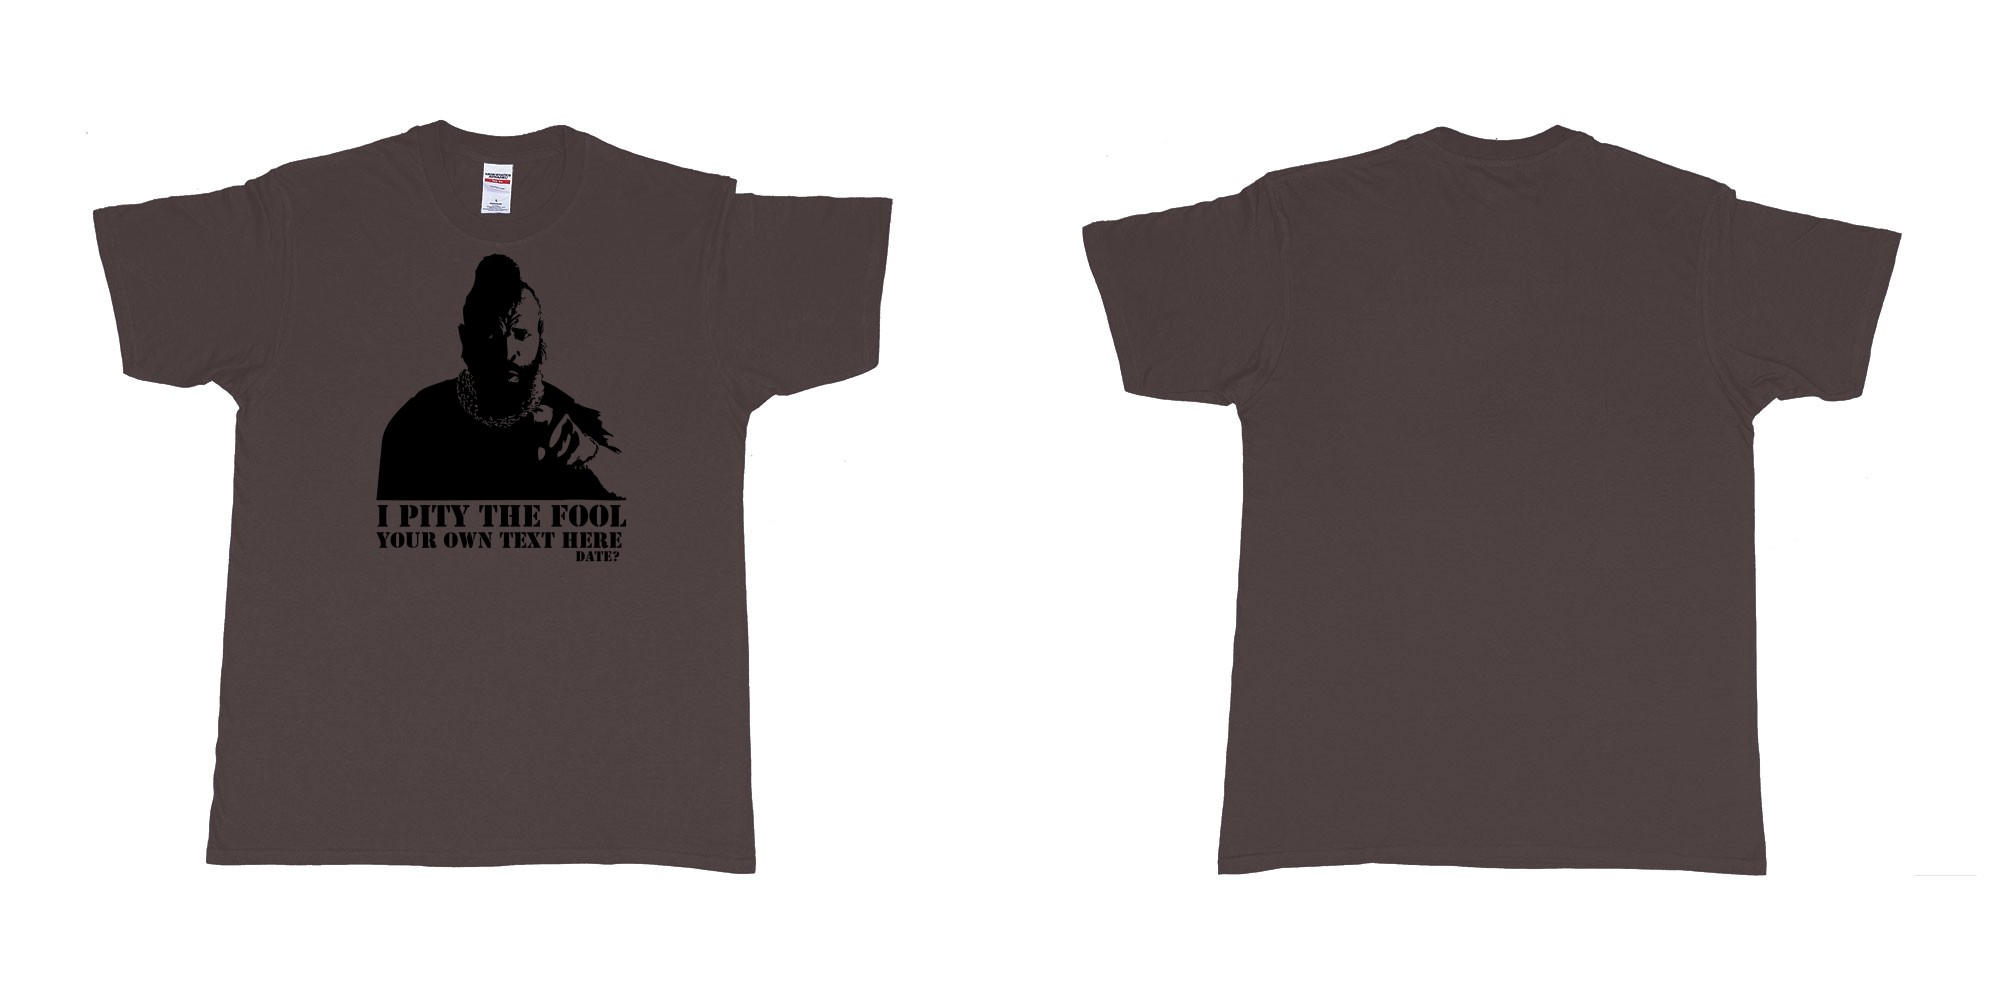 Custom tshirt design I pity the fool in fabric color dark-chocolate choice your own text made in Bali by The Pirate Way